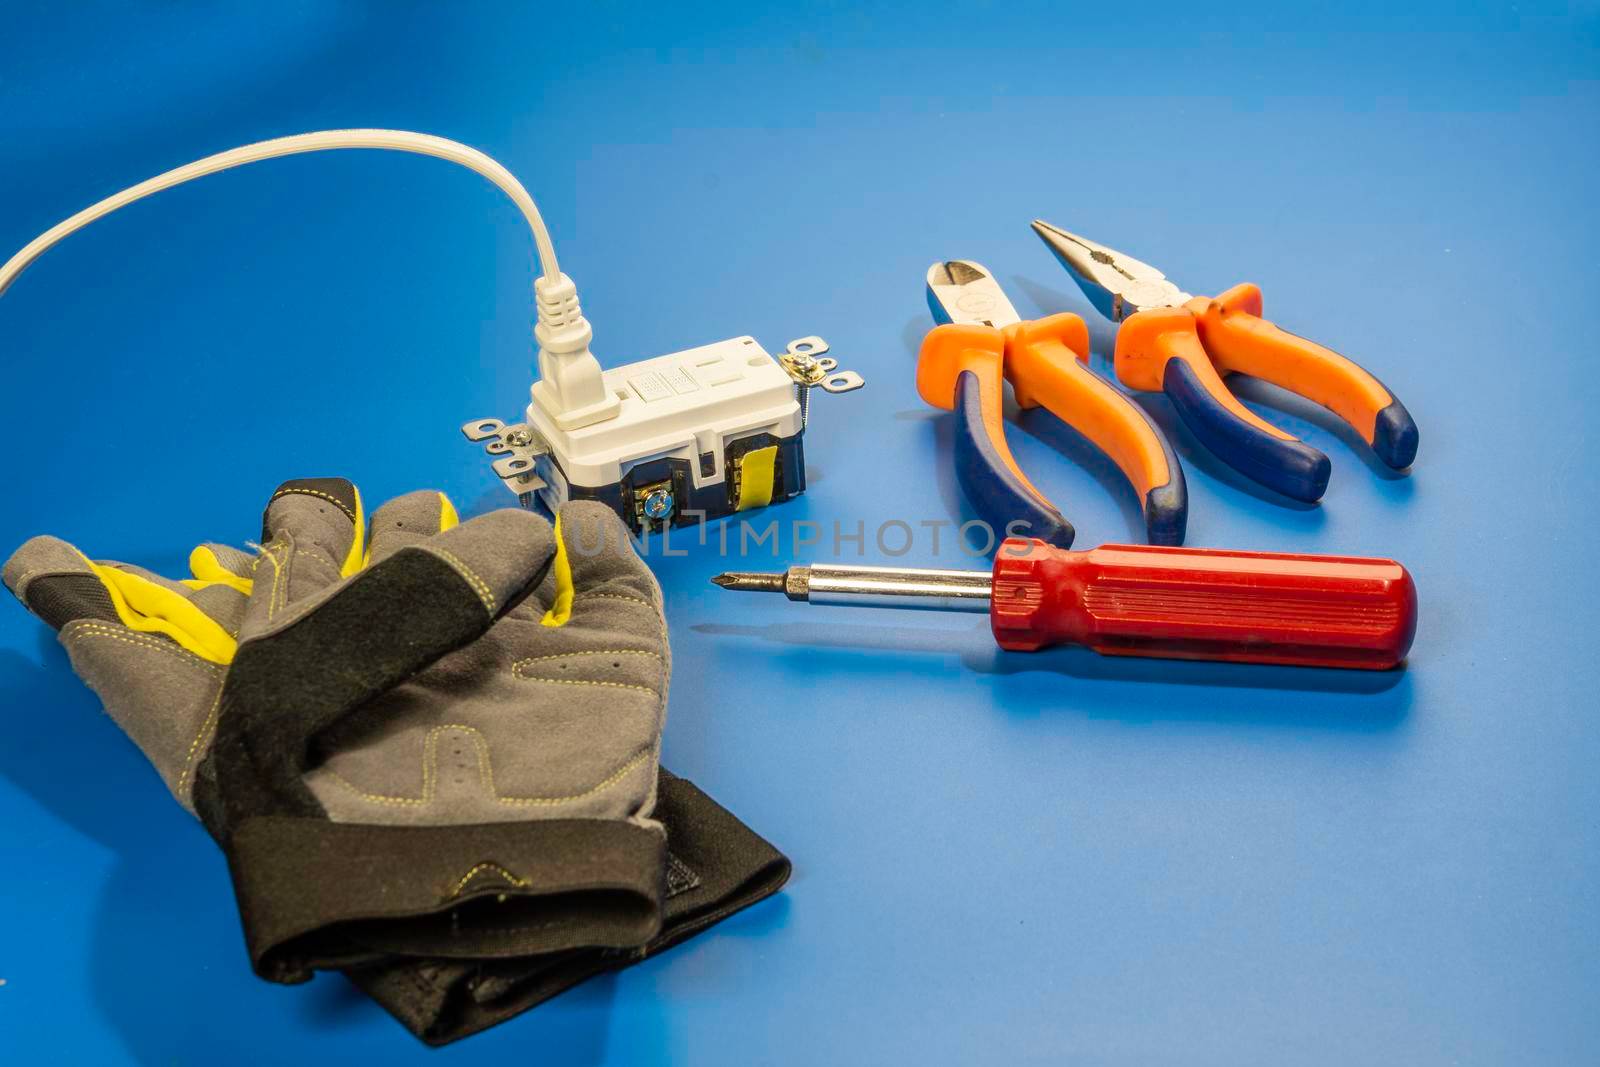 Gloves, electrical outlet, and electrician's tools against a blue background by ben44